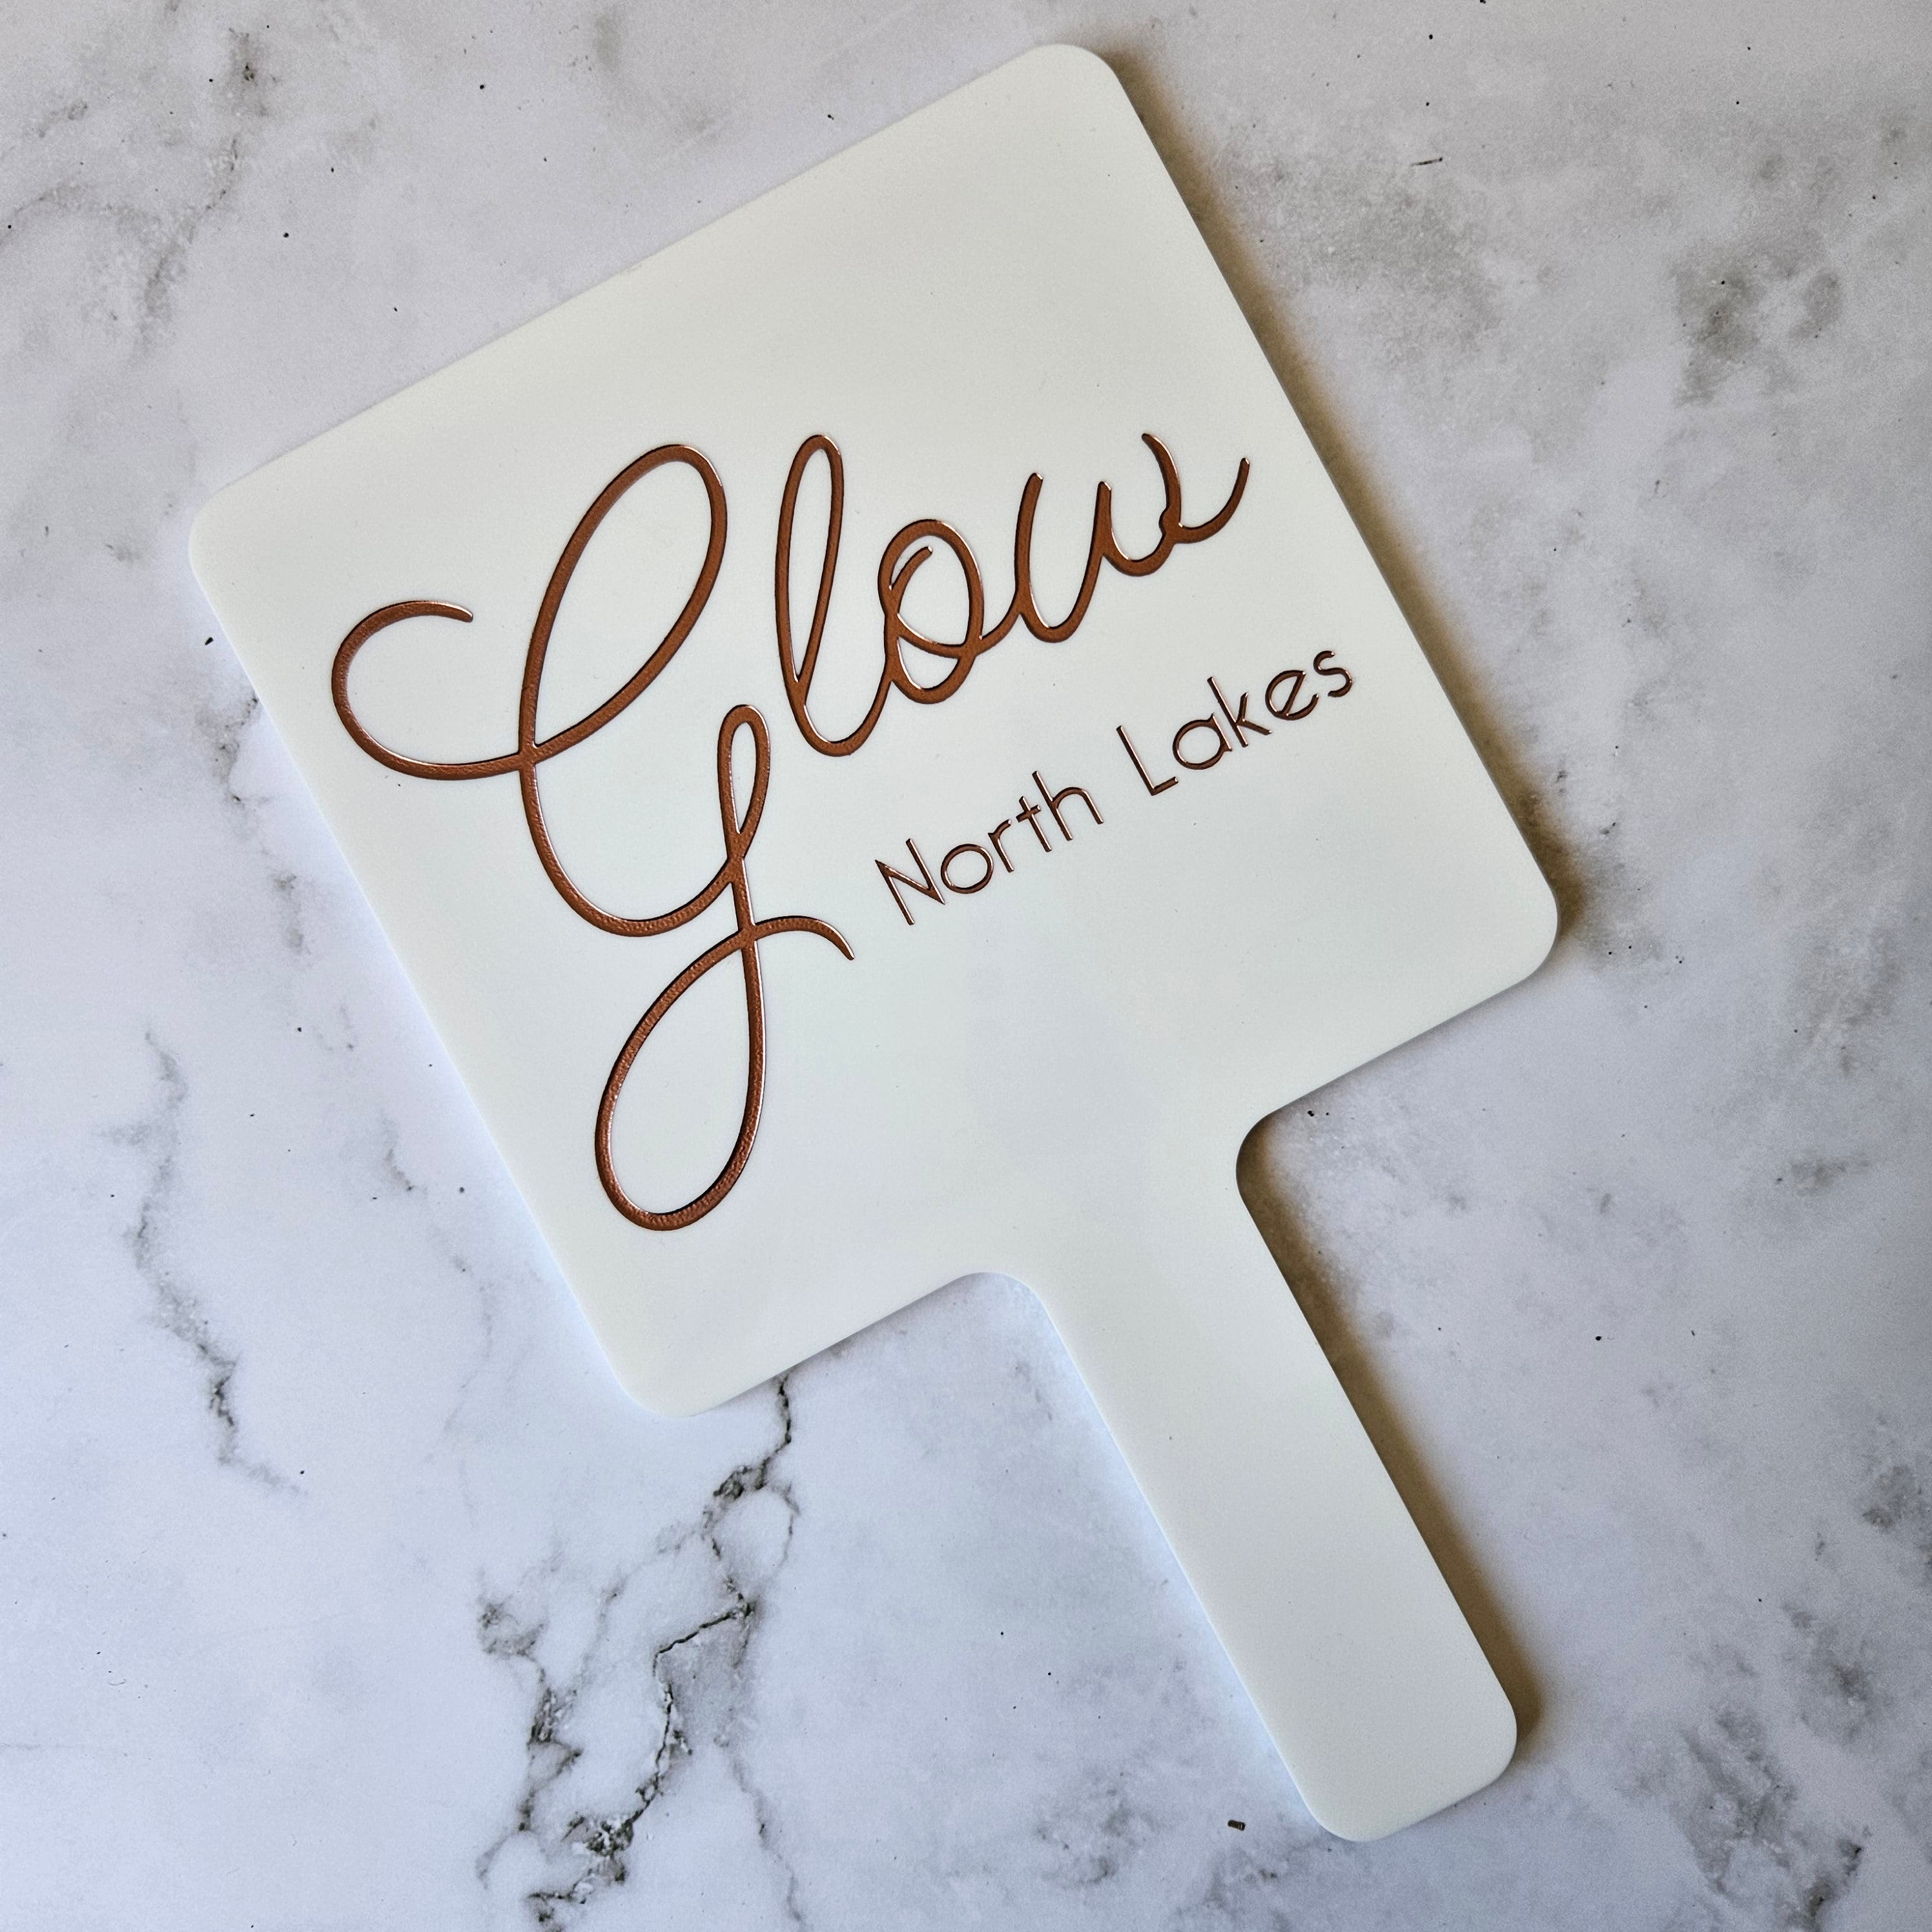 Custom Handheld Mirror with Logo for Glow North Lakes Beauty Salon - Square handheld mirror in white acrylic with Metallic Rose Gold logo